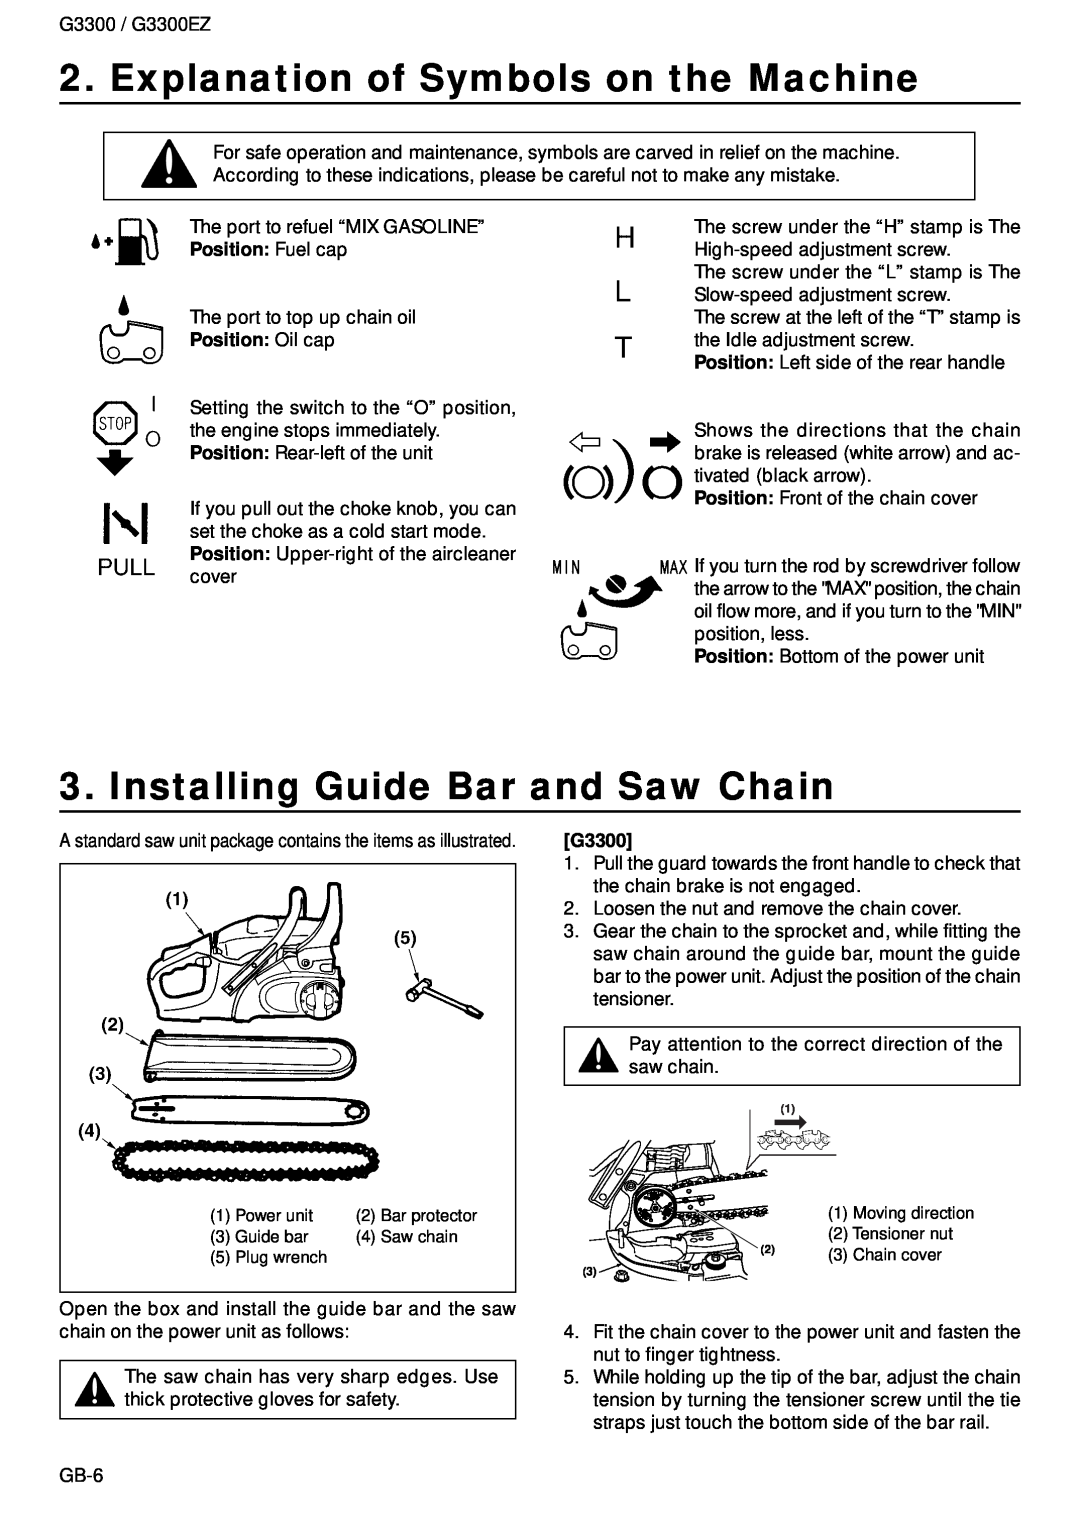 Zenoah G3300EZ owner manual Explanation of Symbols on the Machine, Installing Guide Bar and Saw Chain, Position Oil cap 